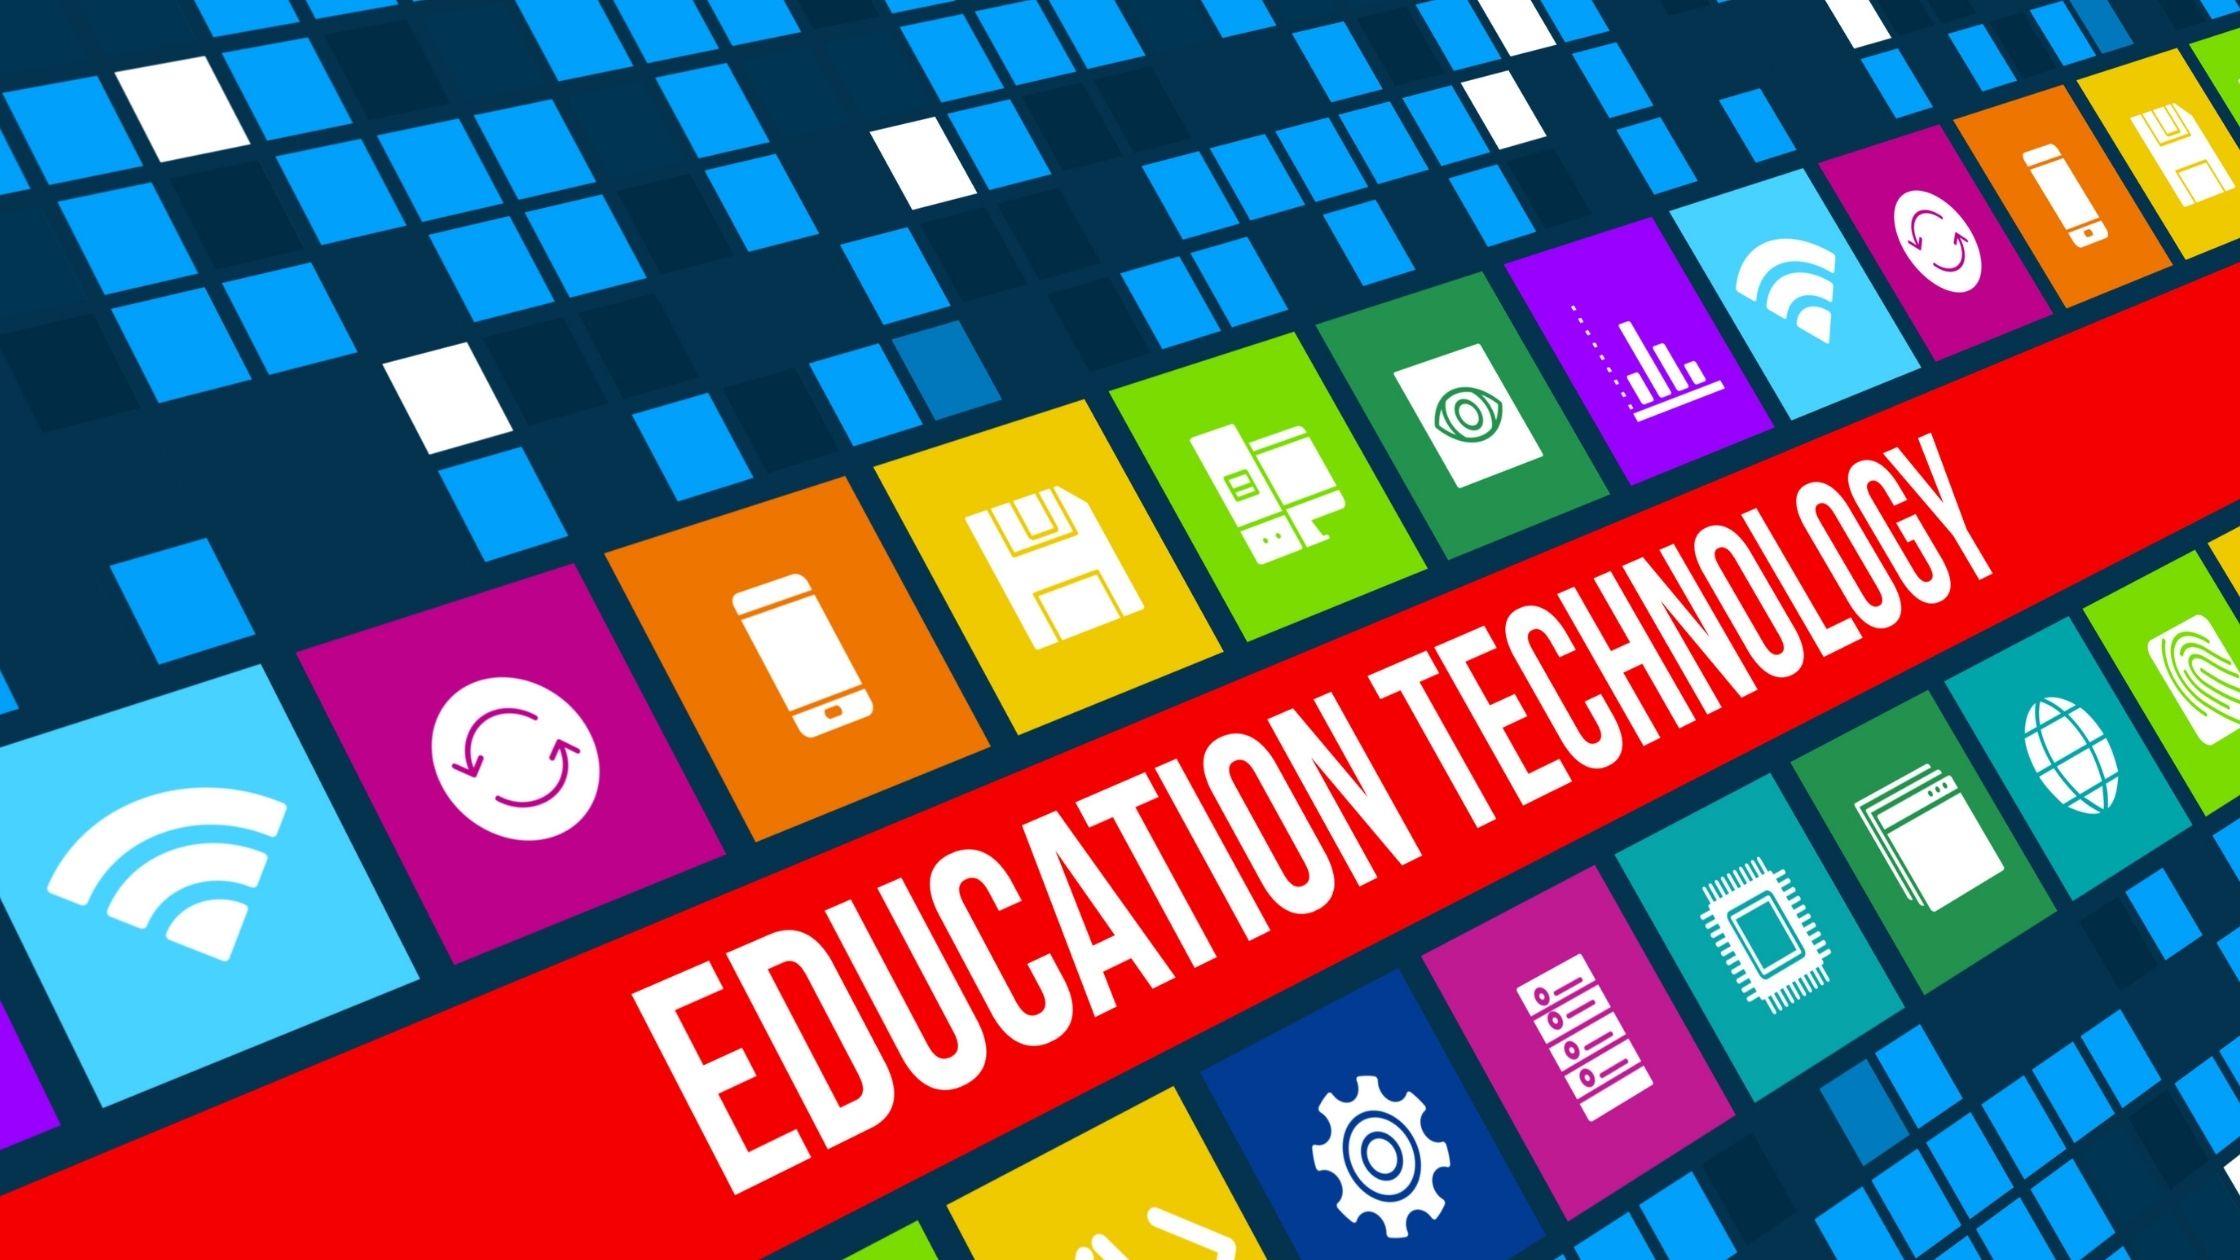 technology in education now